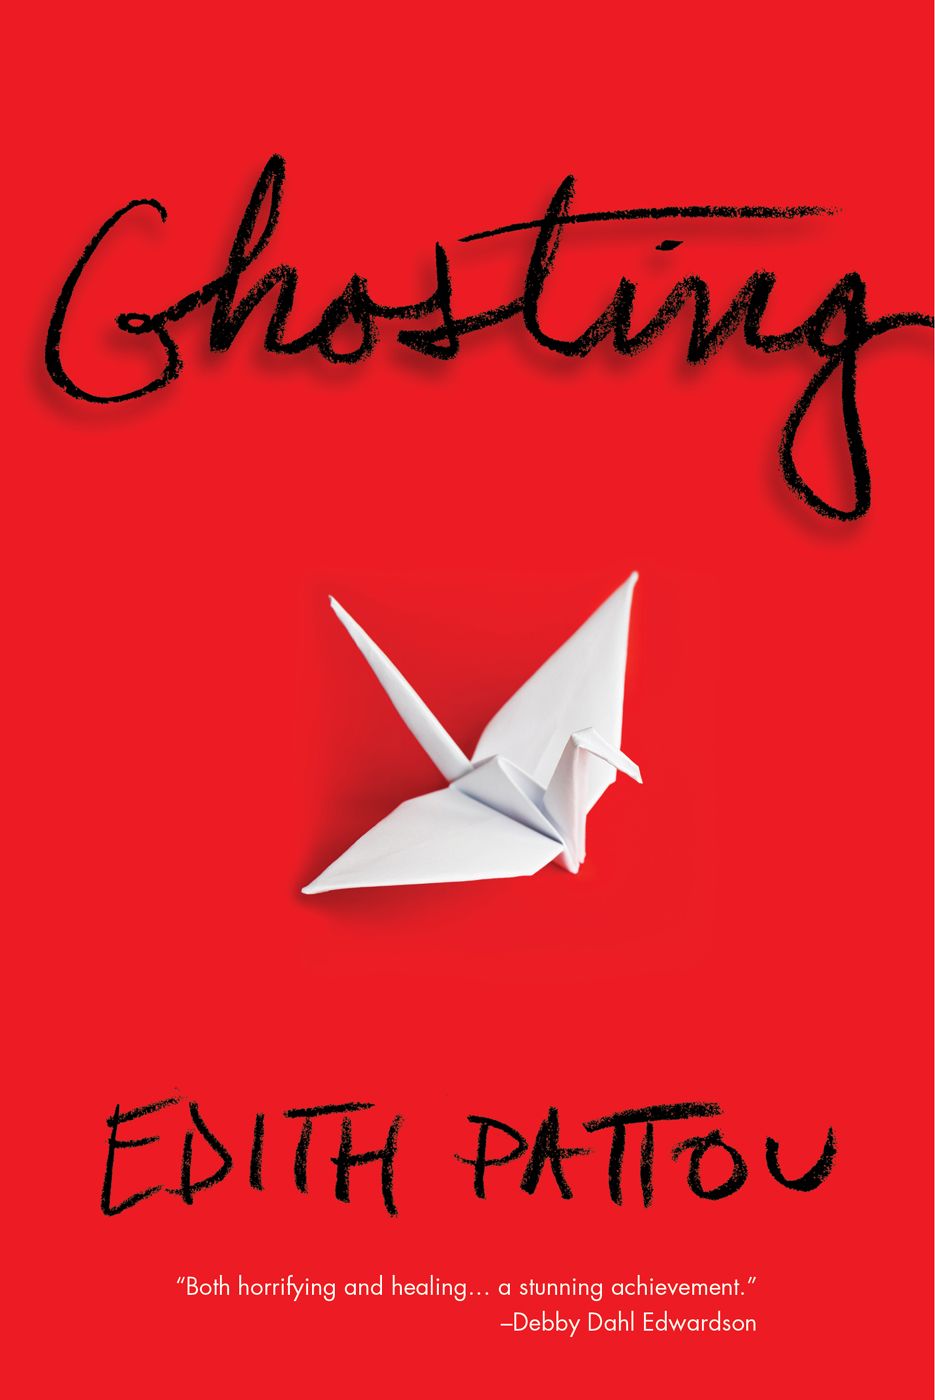 Ghosting by Edith Pattou